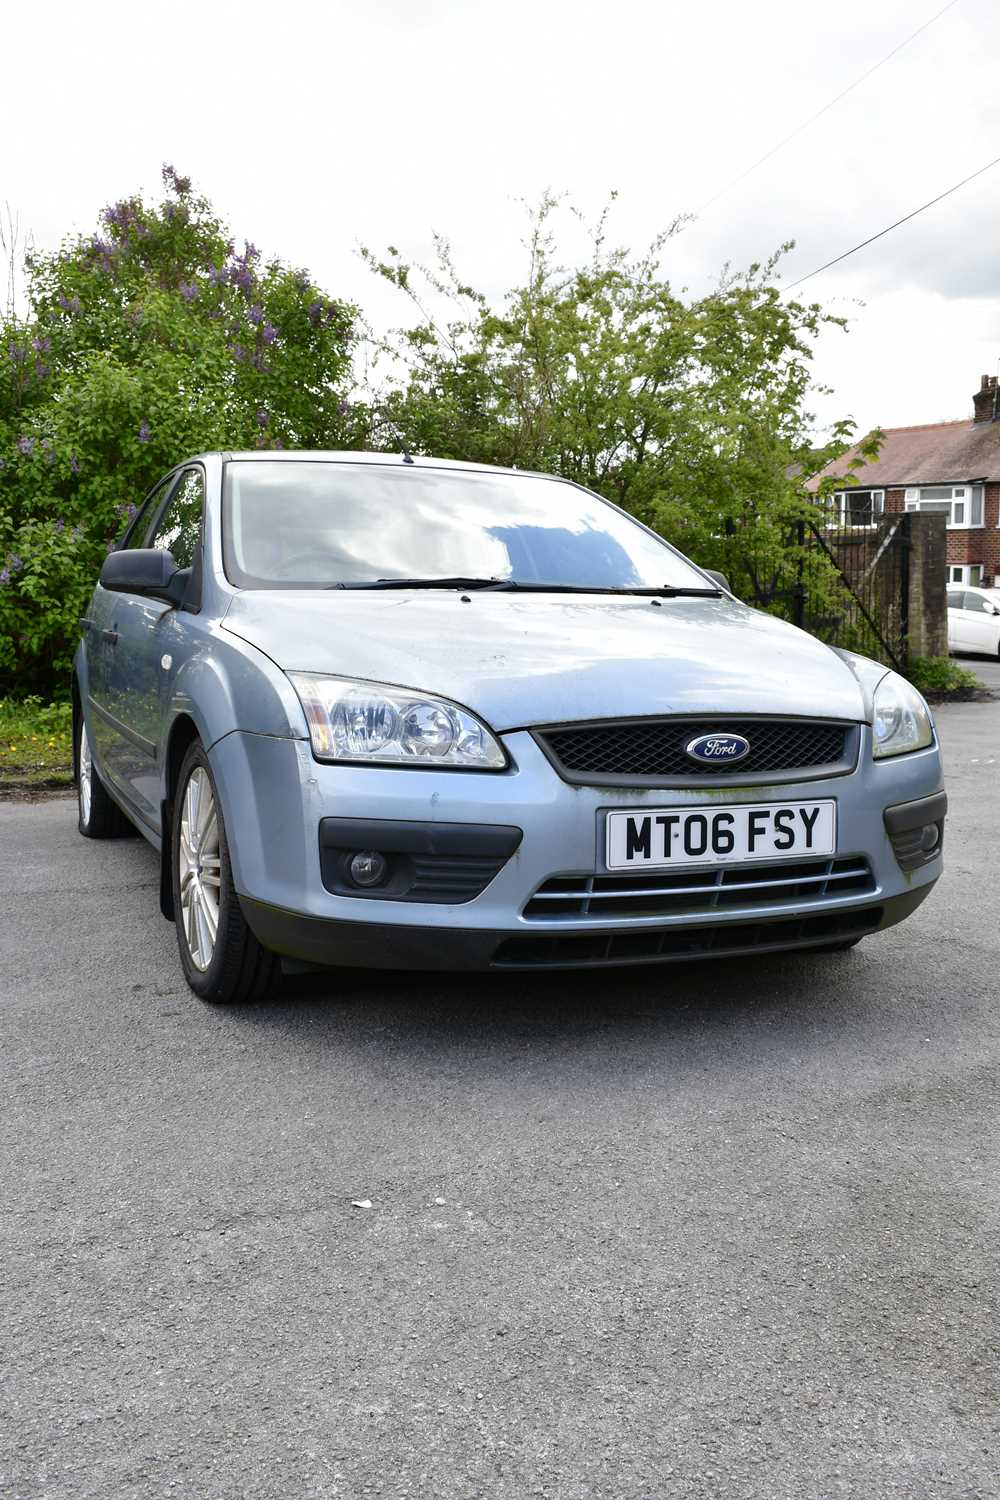 A Ford Focus Sport, registration MT06 FSY, blue colourway, approx mileage 28,271, complete with an - Image 4 of 11